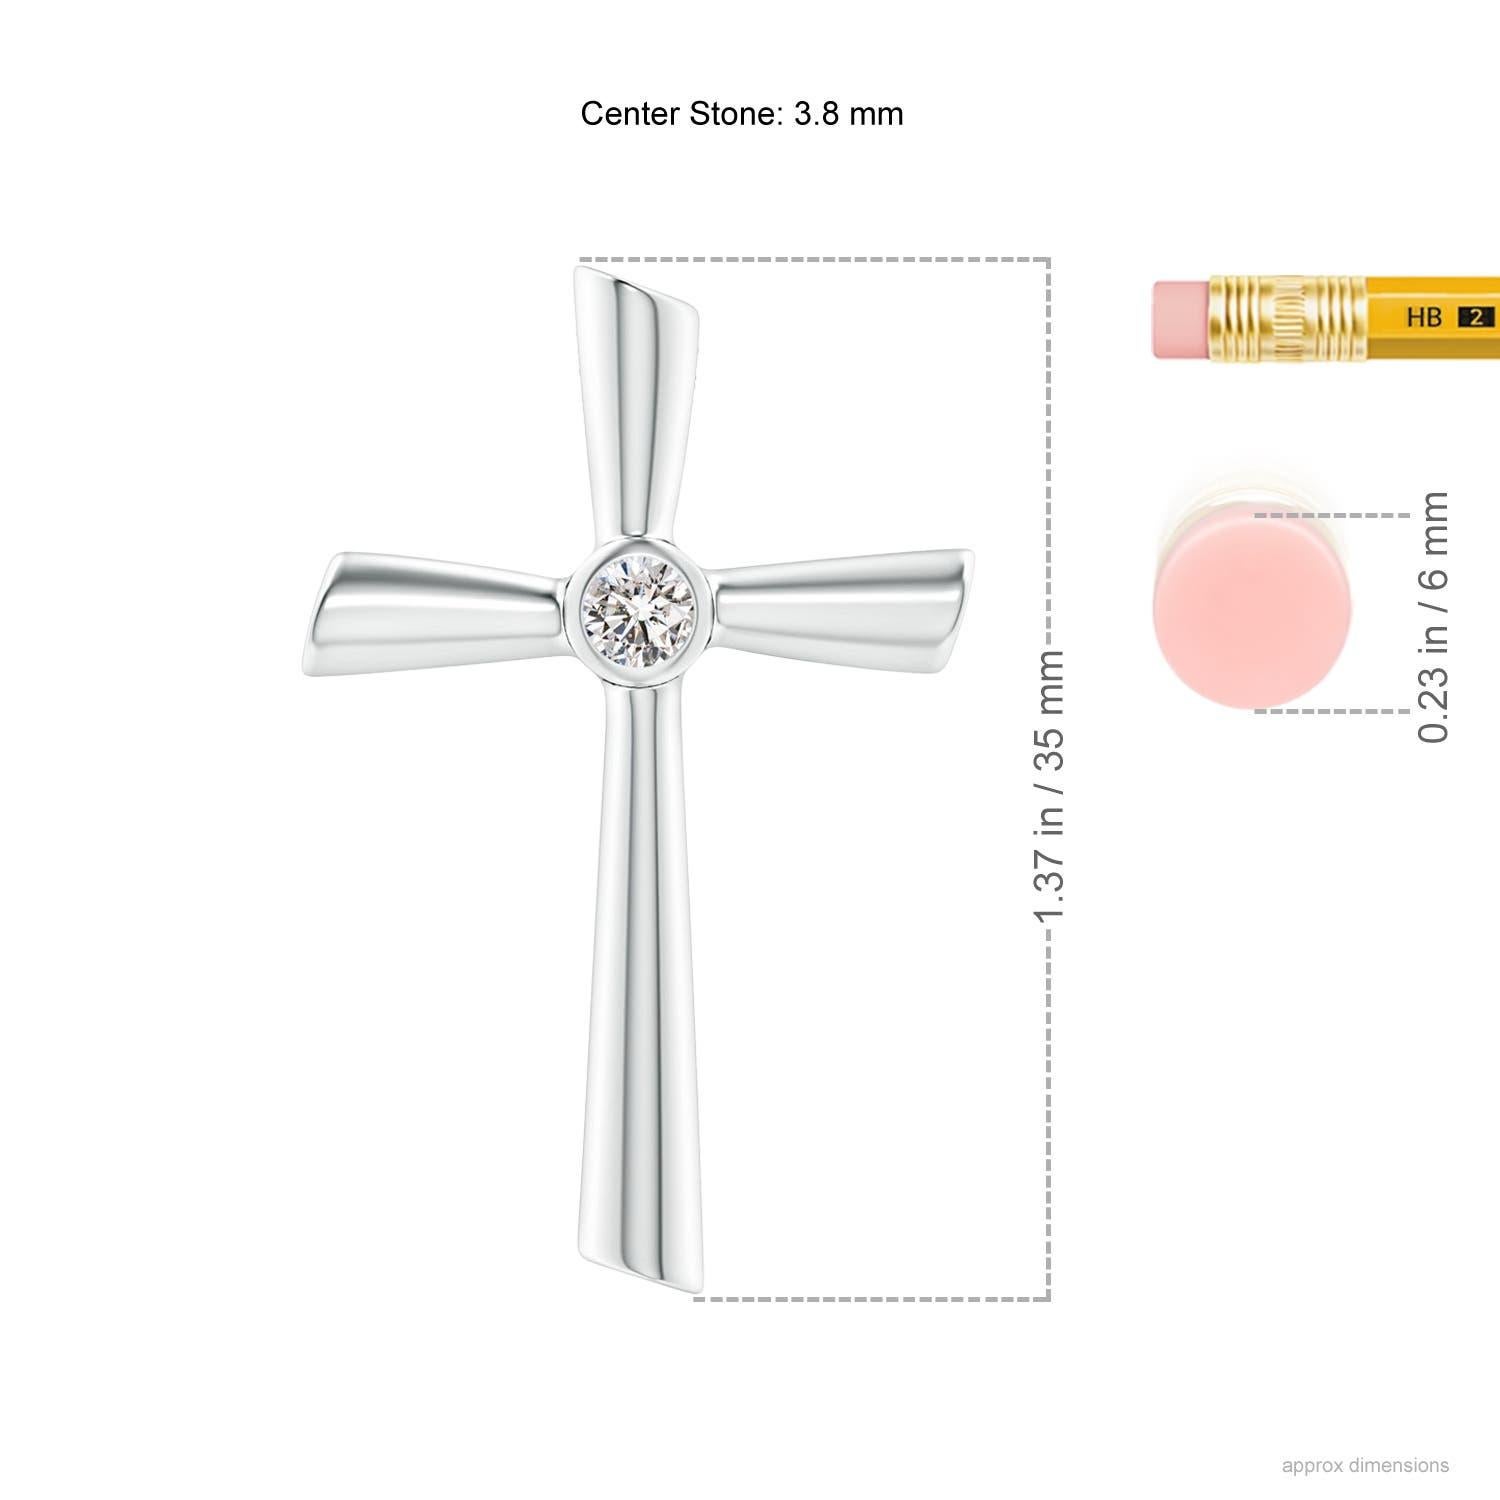 Designed in platinum, this diamond crucifix pendant features a twinkling solitaire diamond at the core. The grooves exude a reflective allure that complements the brilliance of the round diamond.
Diamond is the Birthstone for April and traditional